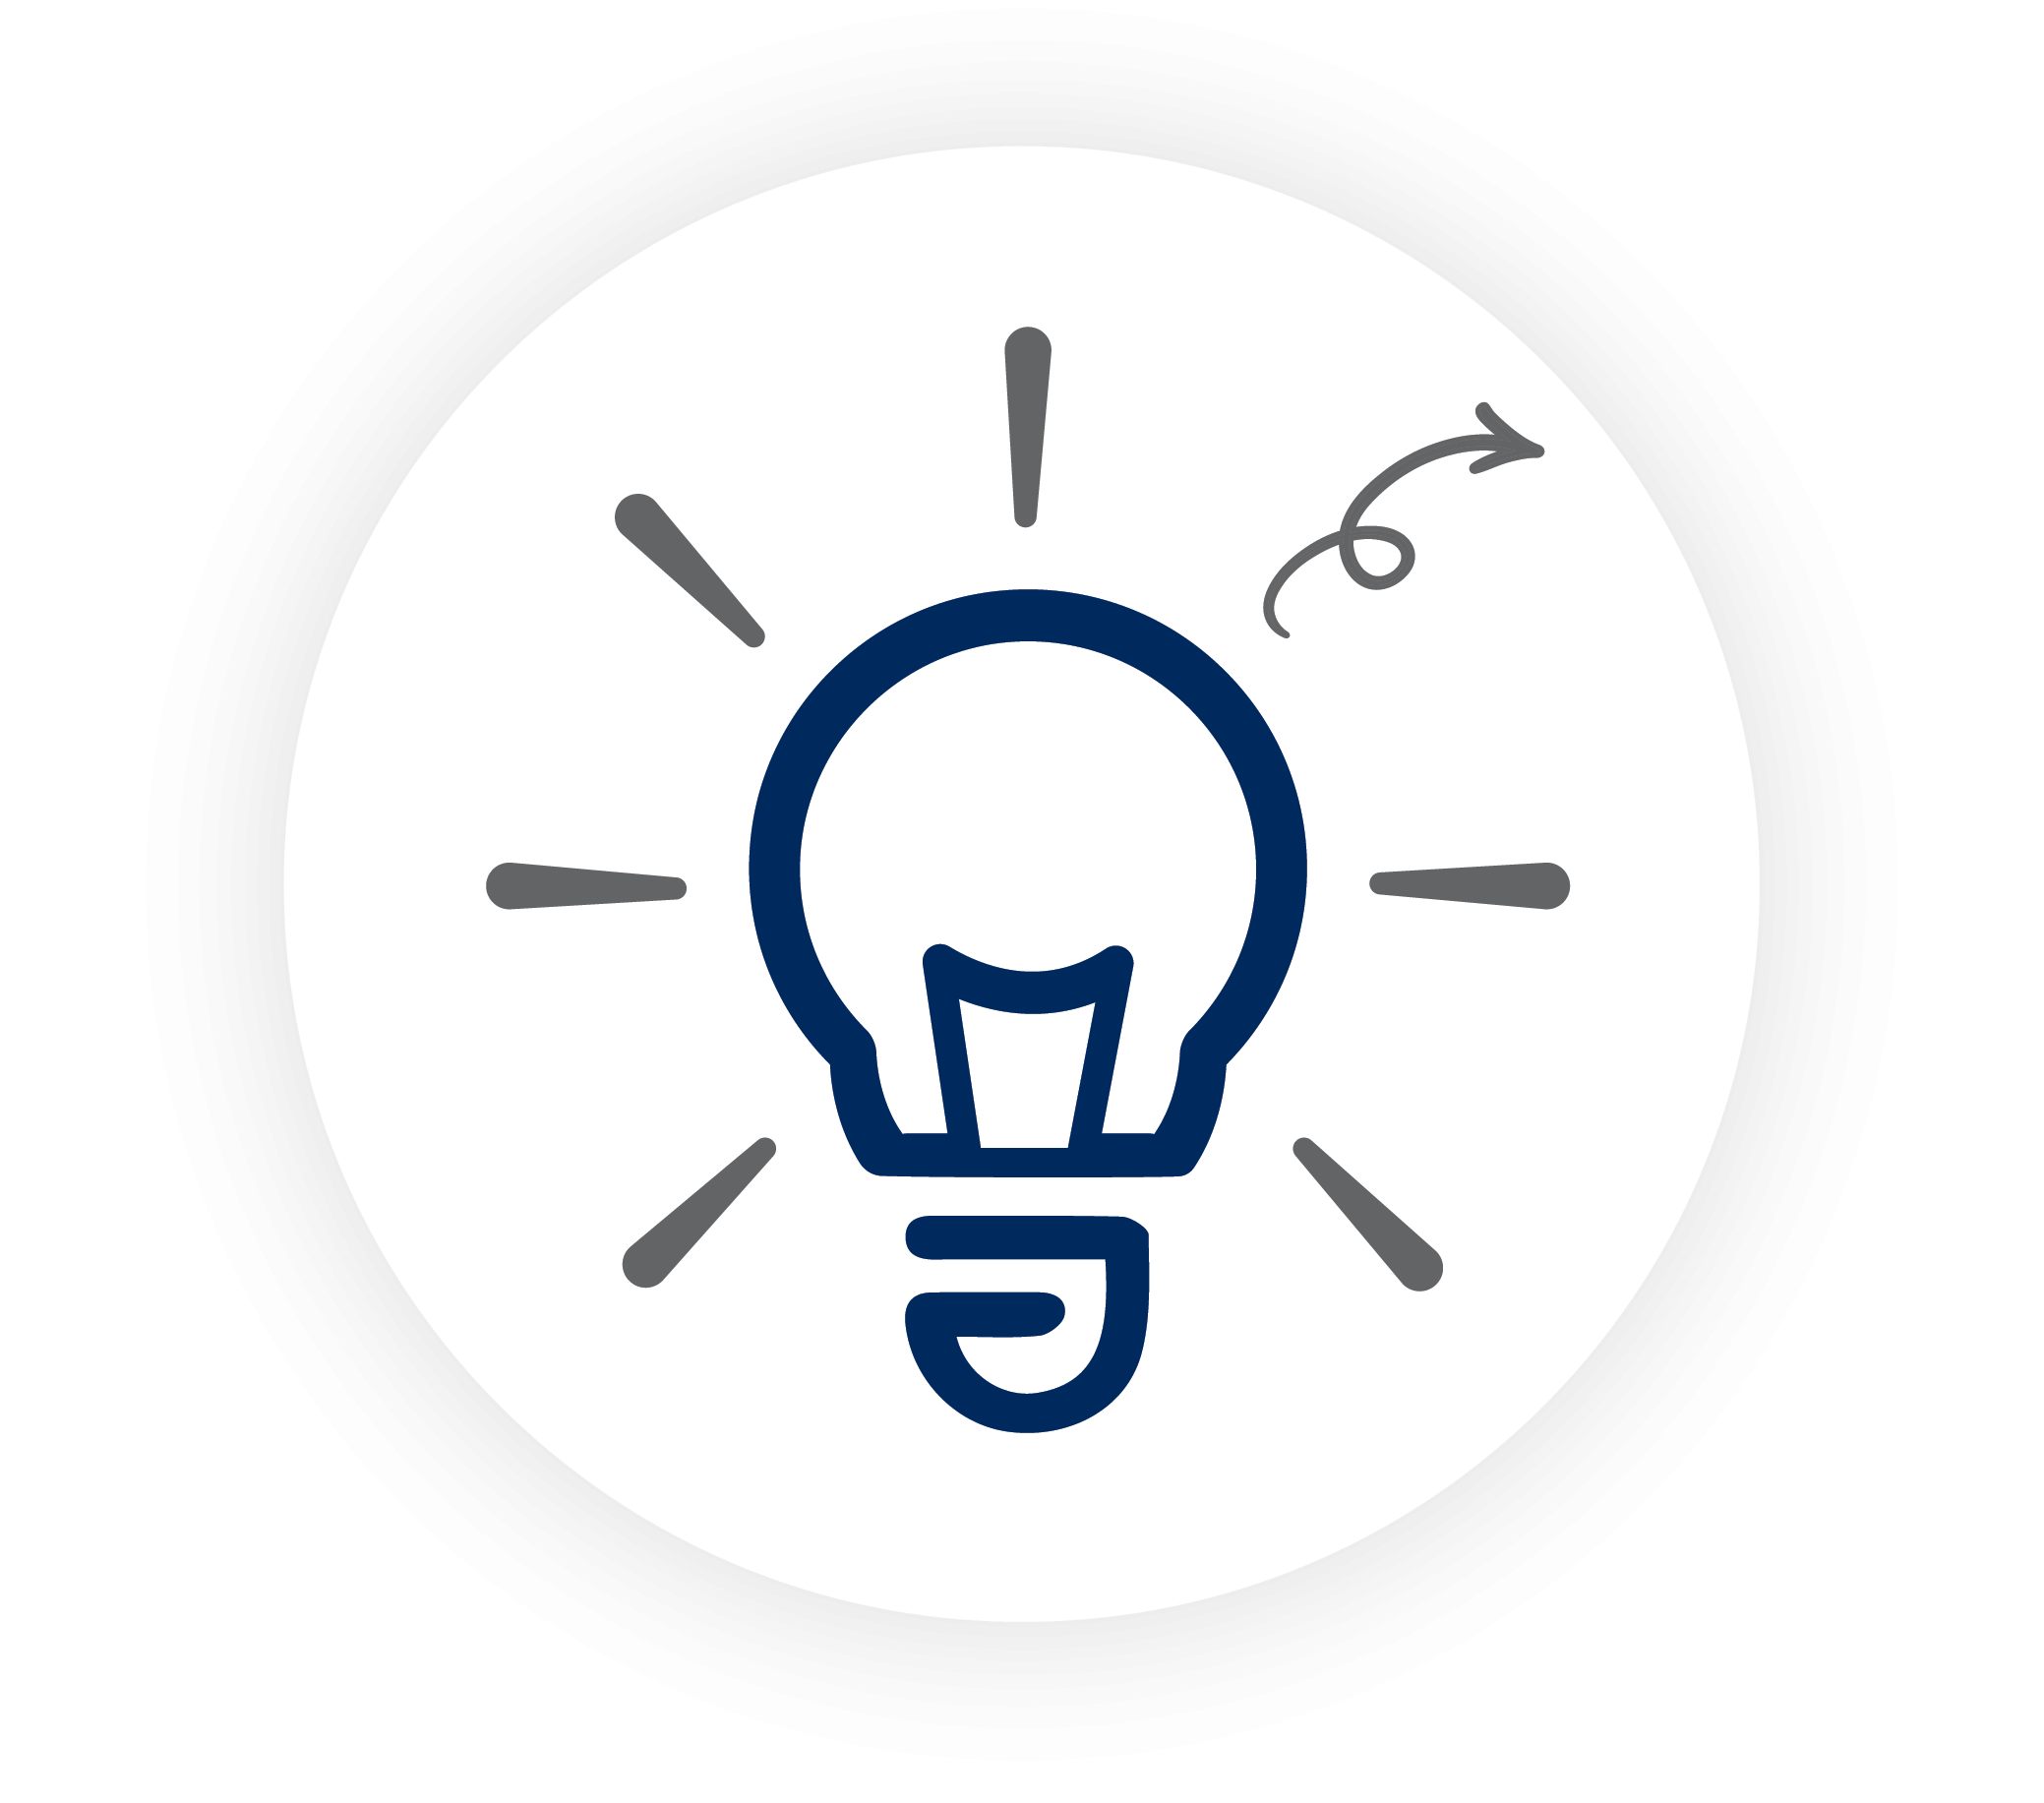 Light bulb icon as a placeholder